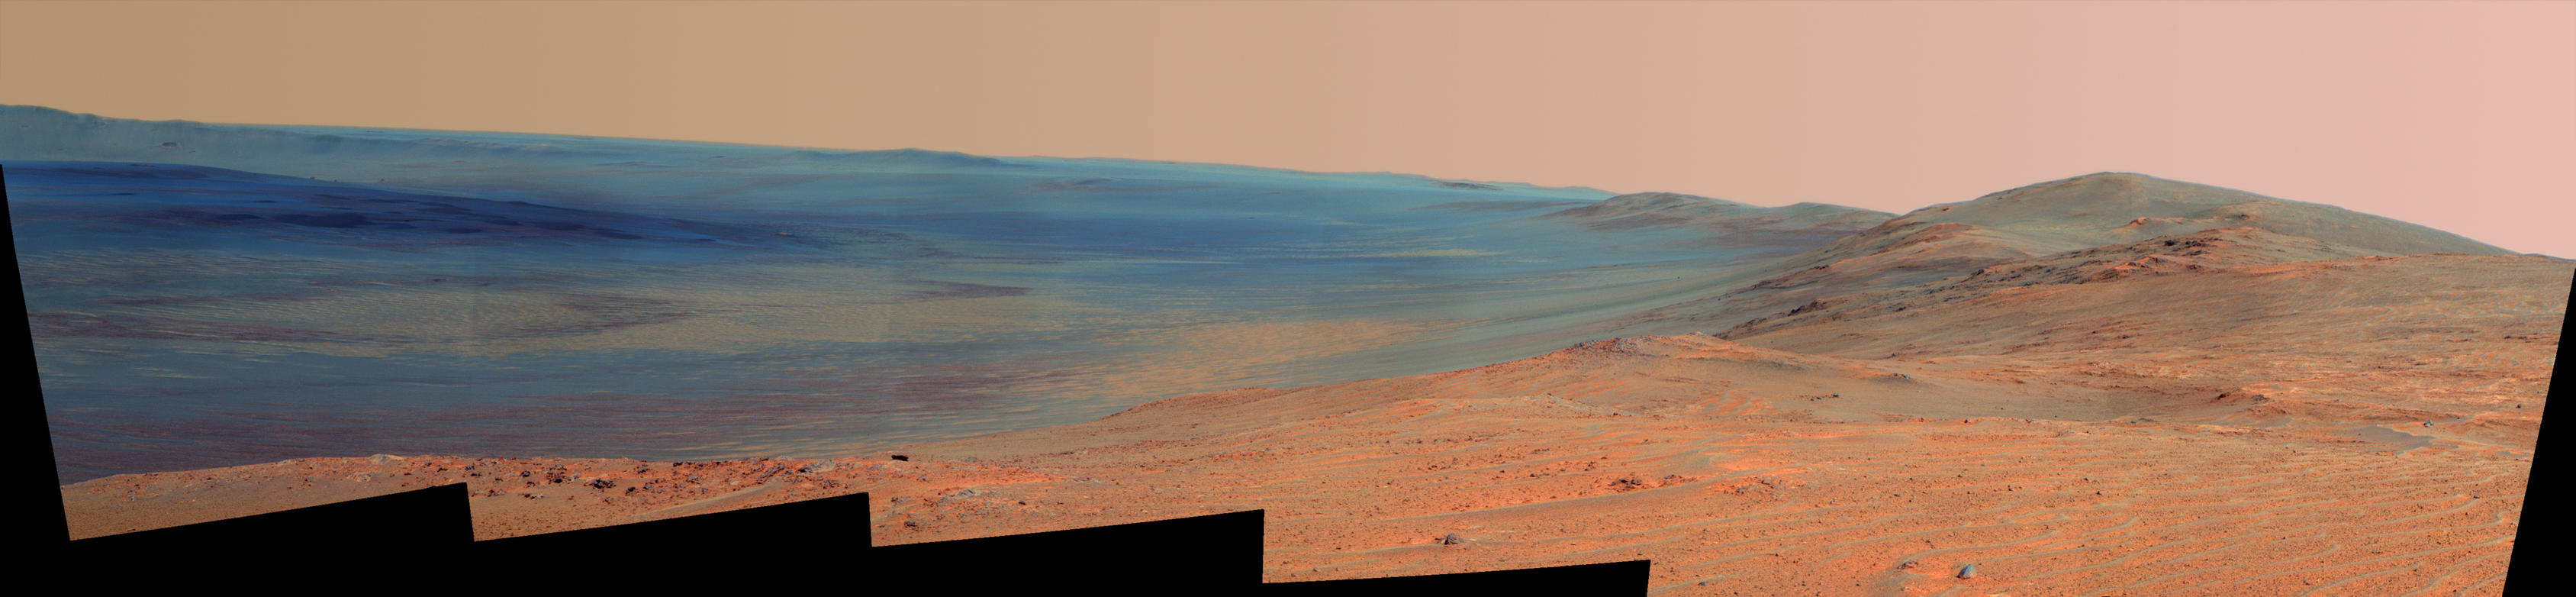 This vista of the Endeavour Crater rim was acquired by NASA's Mars Exploration Rover Opportunity's panoramic camera on April 18, 2014, from "Murray Ridge" on the western rim of the crater. It is presented in false color to make differences in surface materials more easily visible.